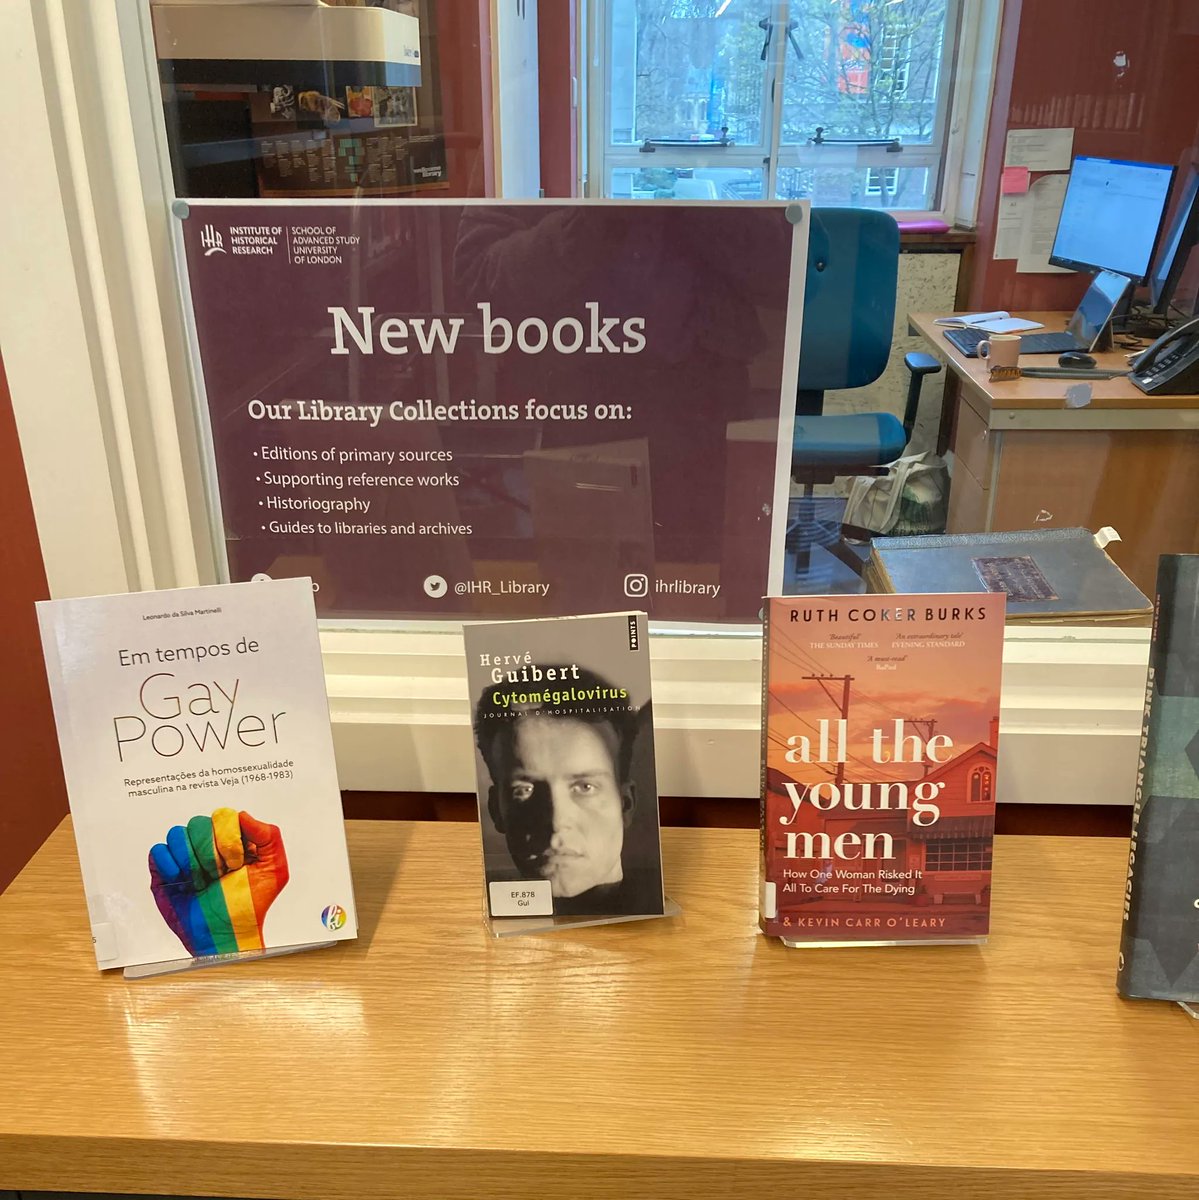 Our current new book display celebrates #LGBTHistoryMonth - come and take a look!